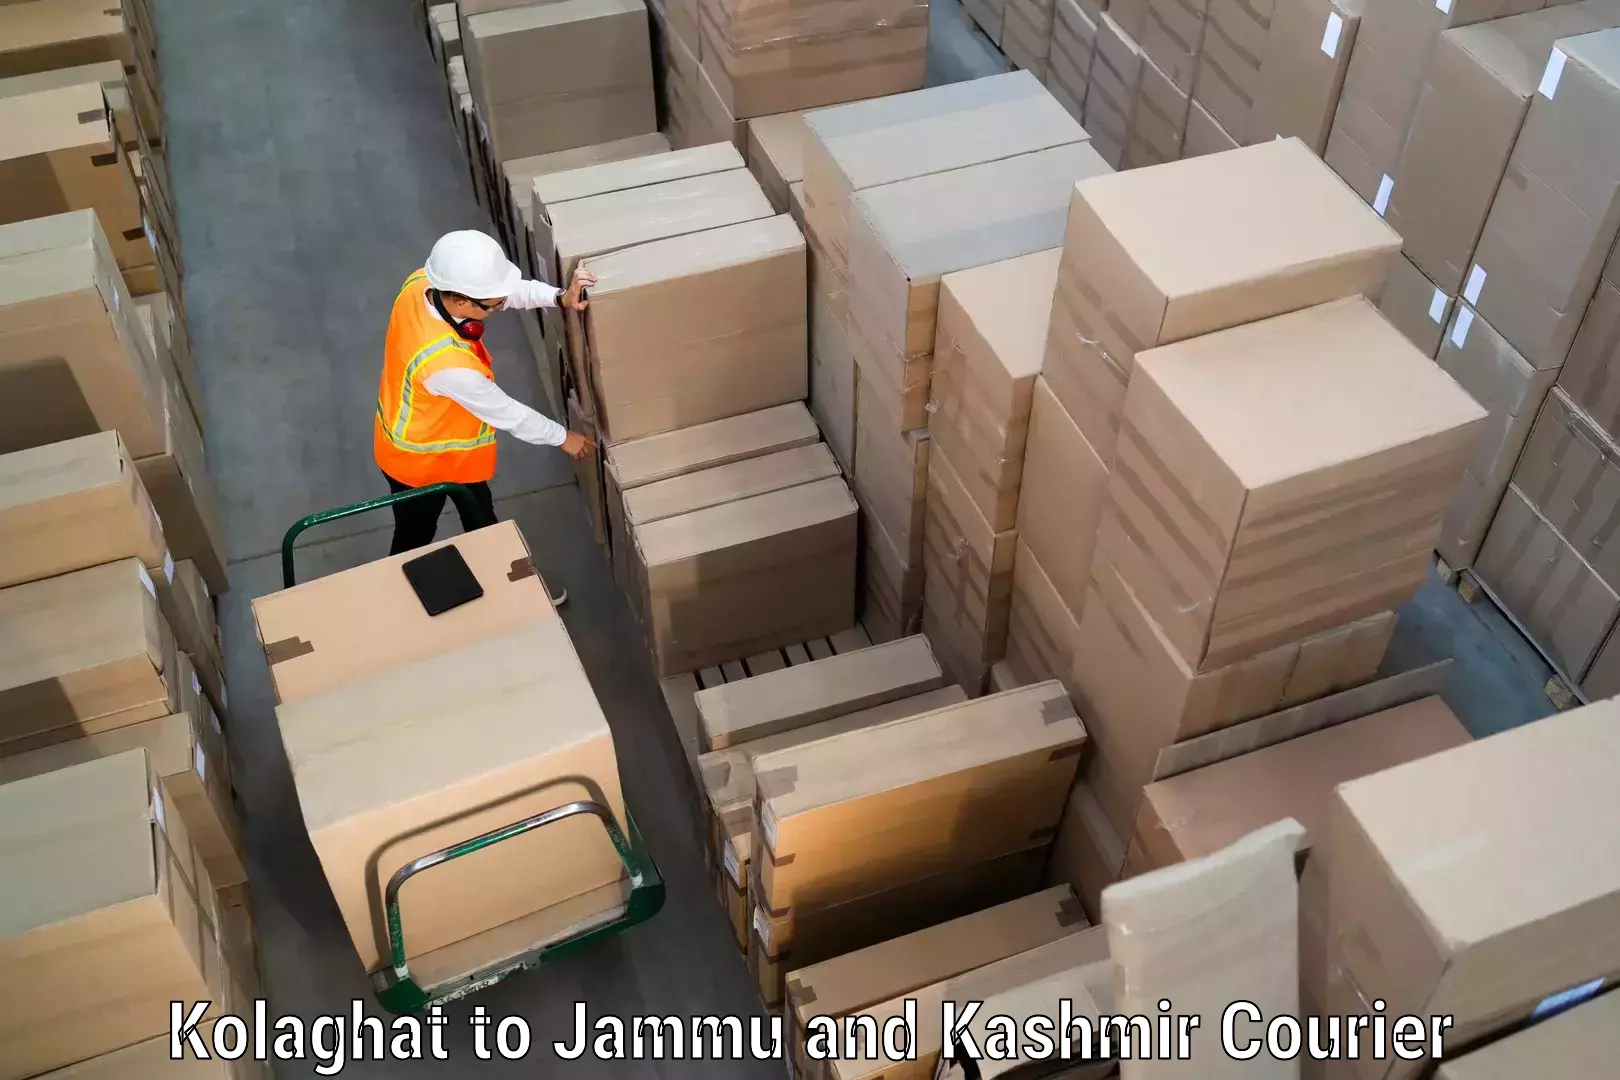 Efficient courier operations Kolaghat to Bhaderwah